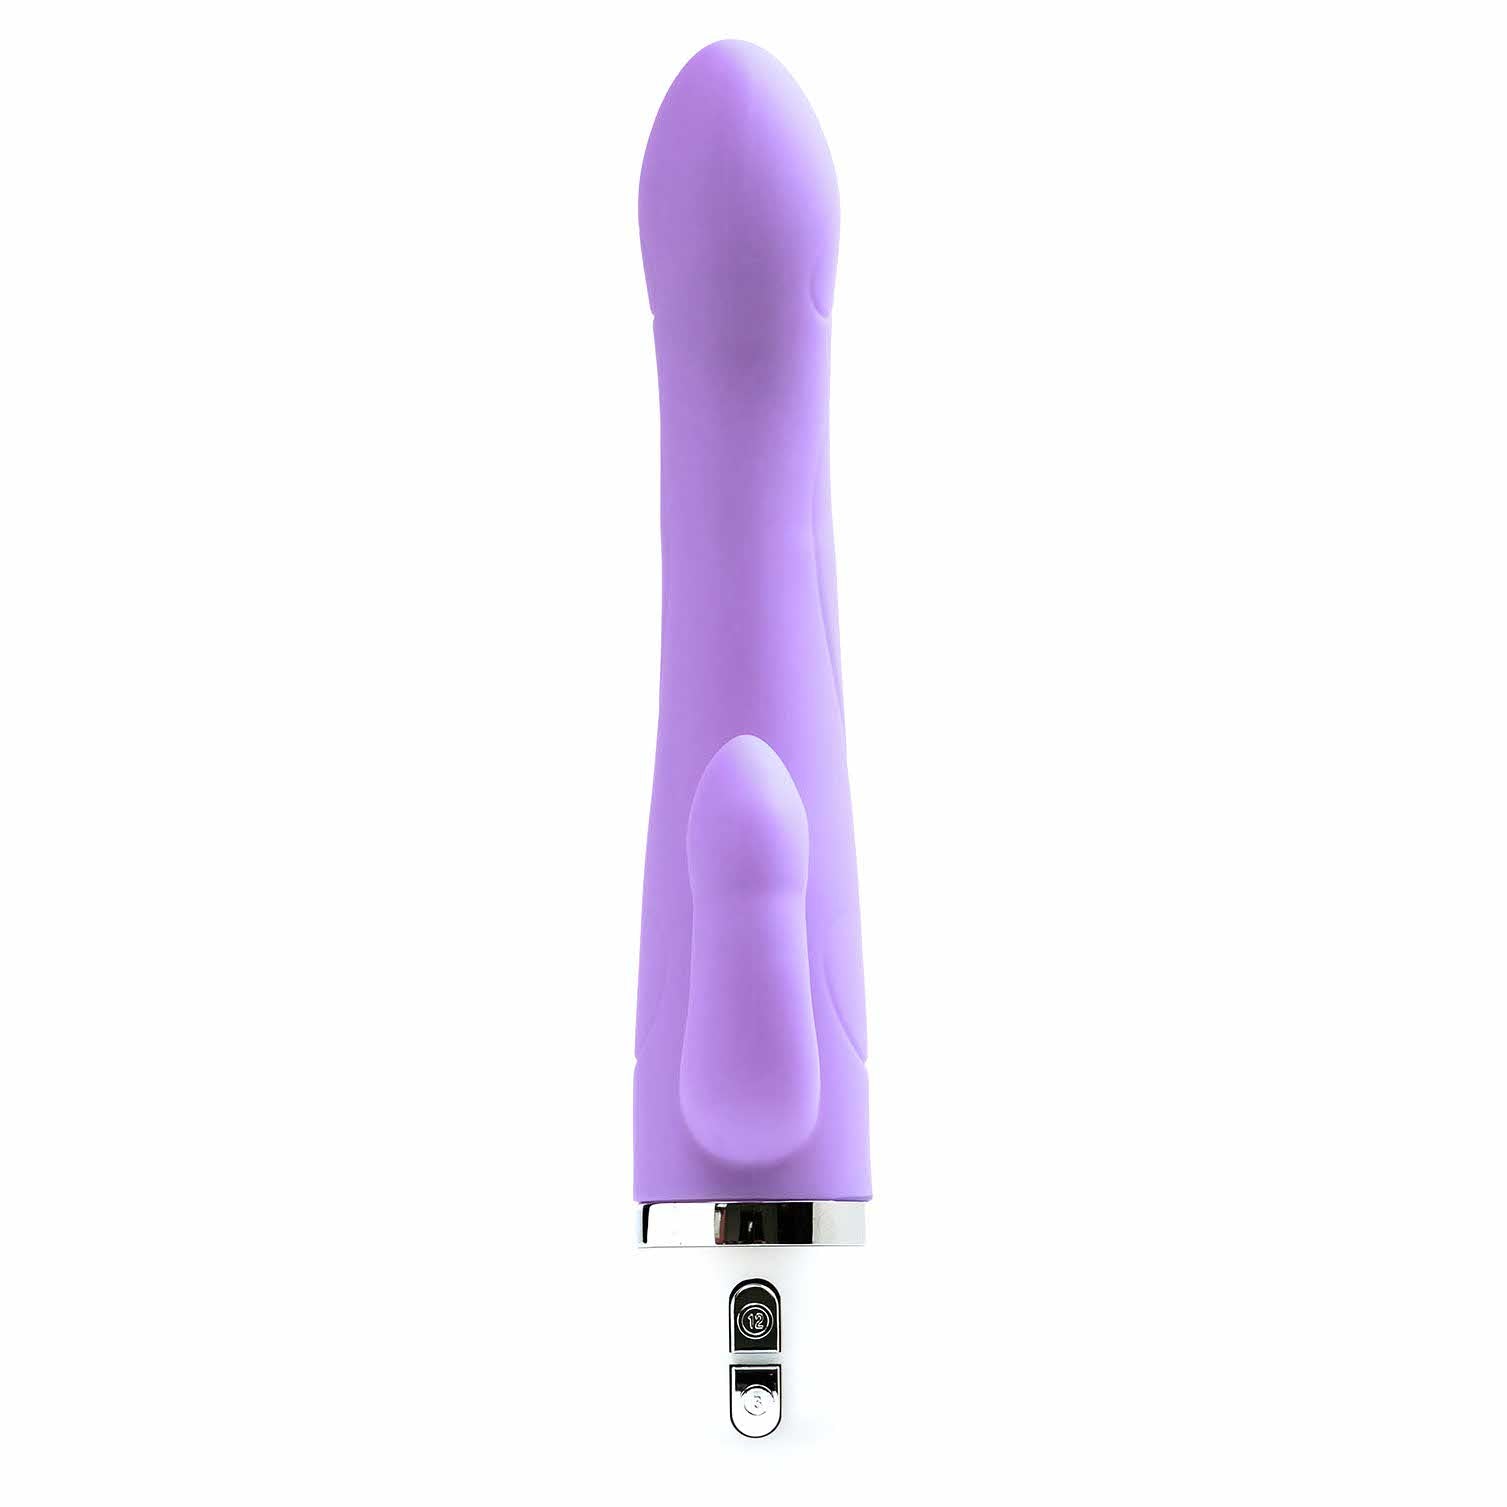 front view of the vedo wink silicone 8.46" rabbit vibrator vibe savvi-p0205 orgasmic orchid